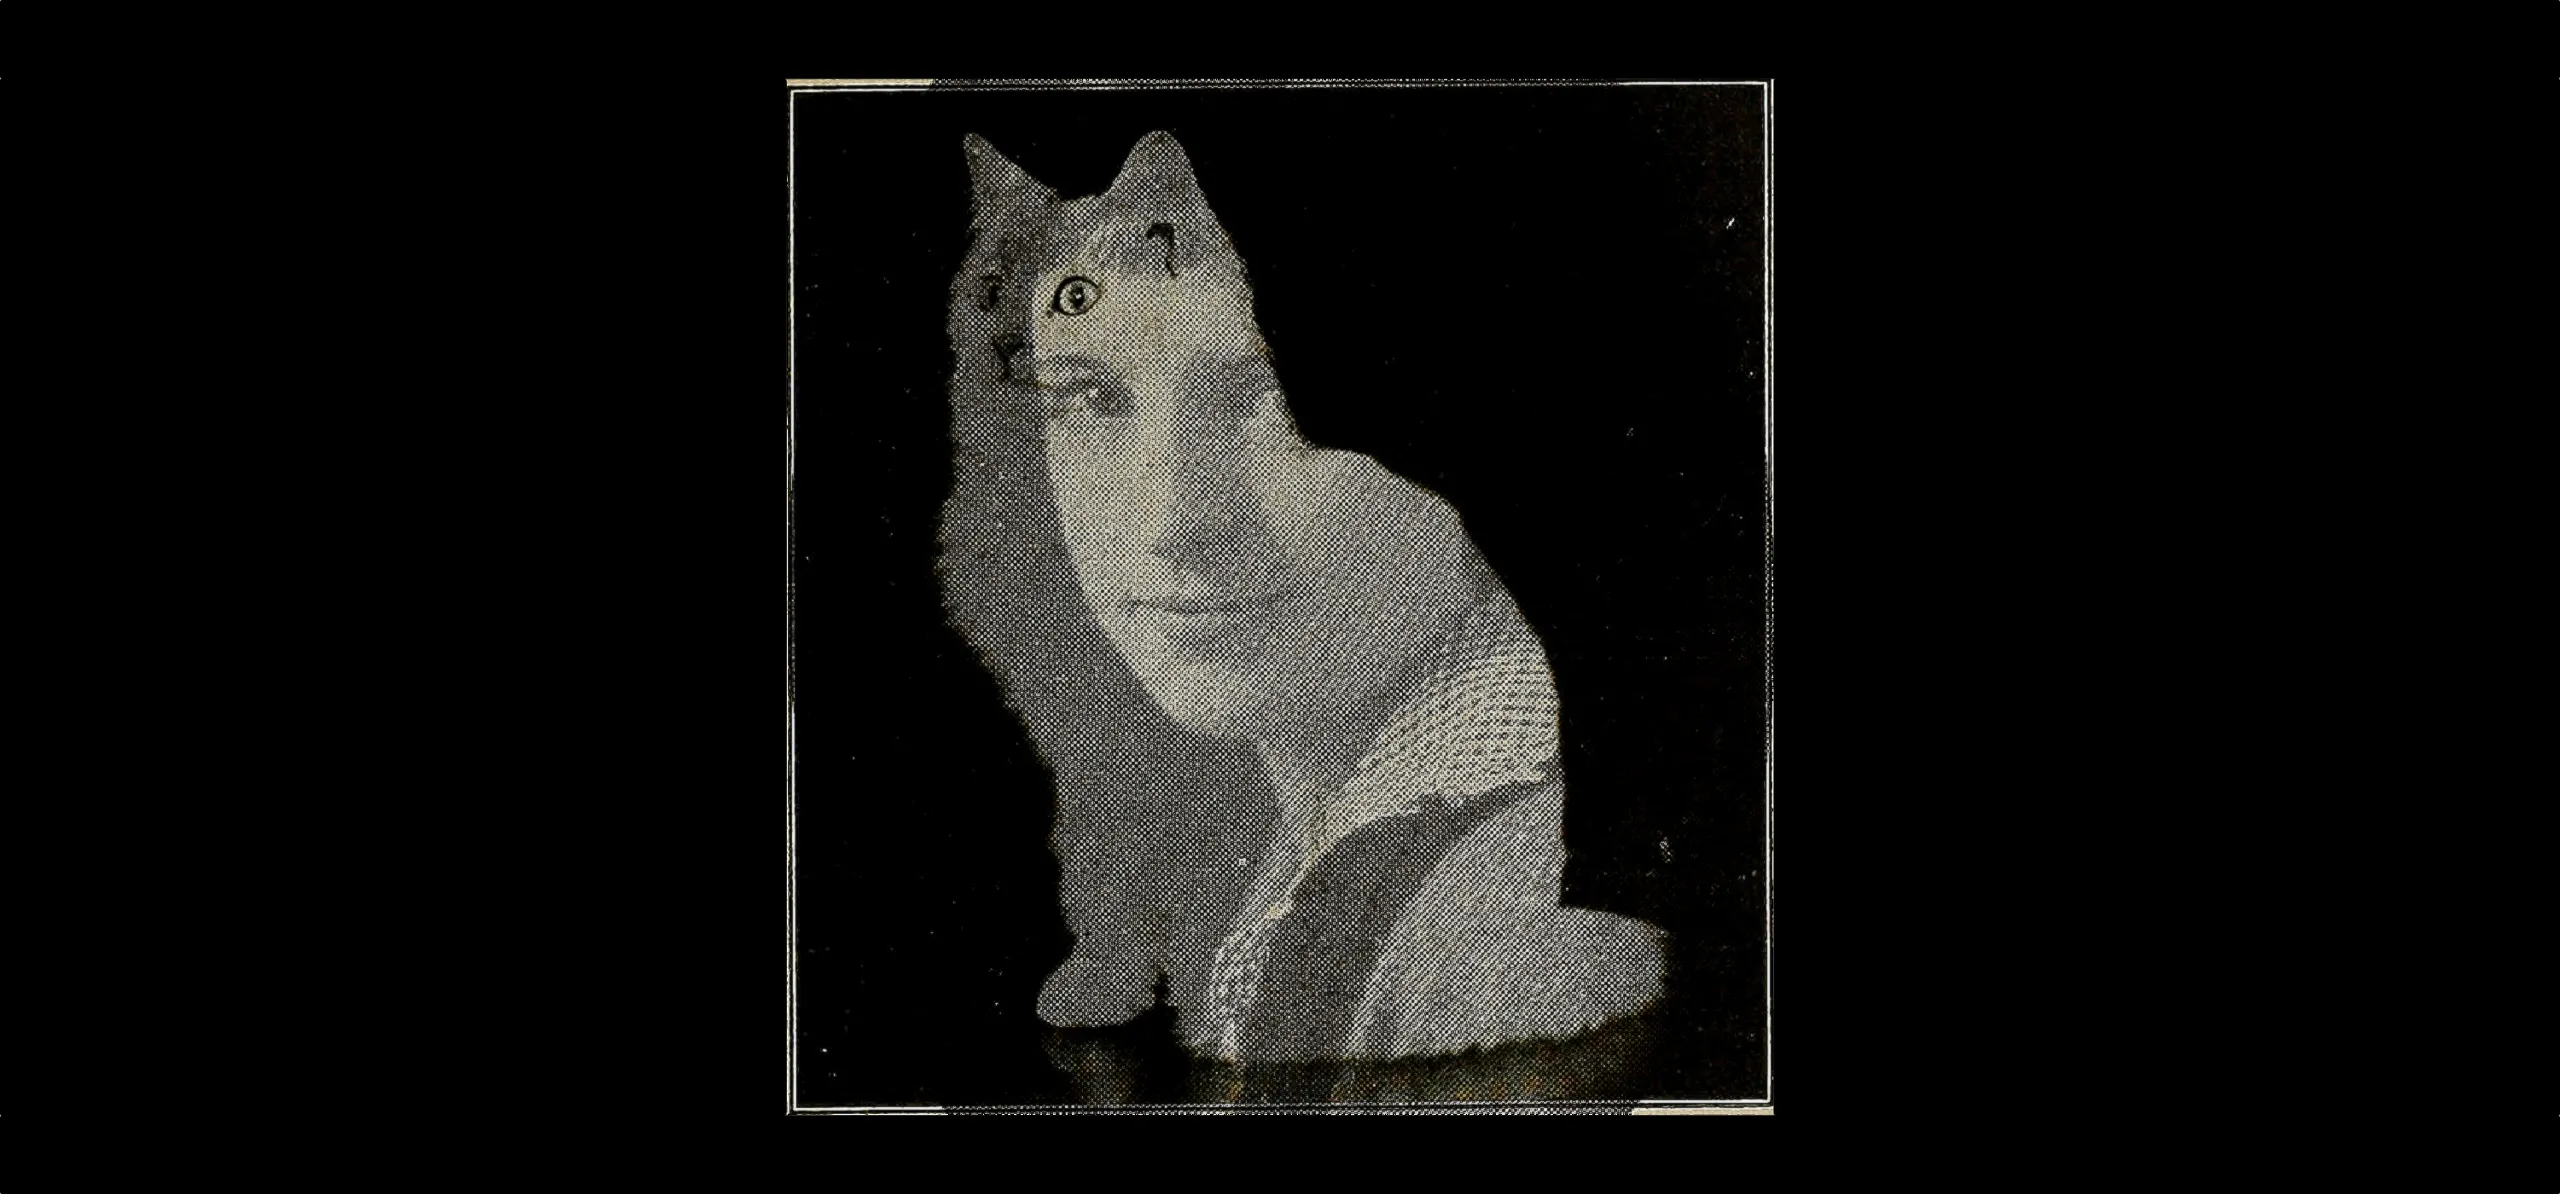 A generated image featuring a cat overlaid with a woman’s face